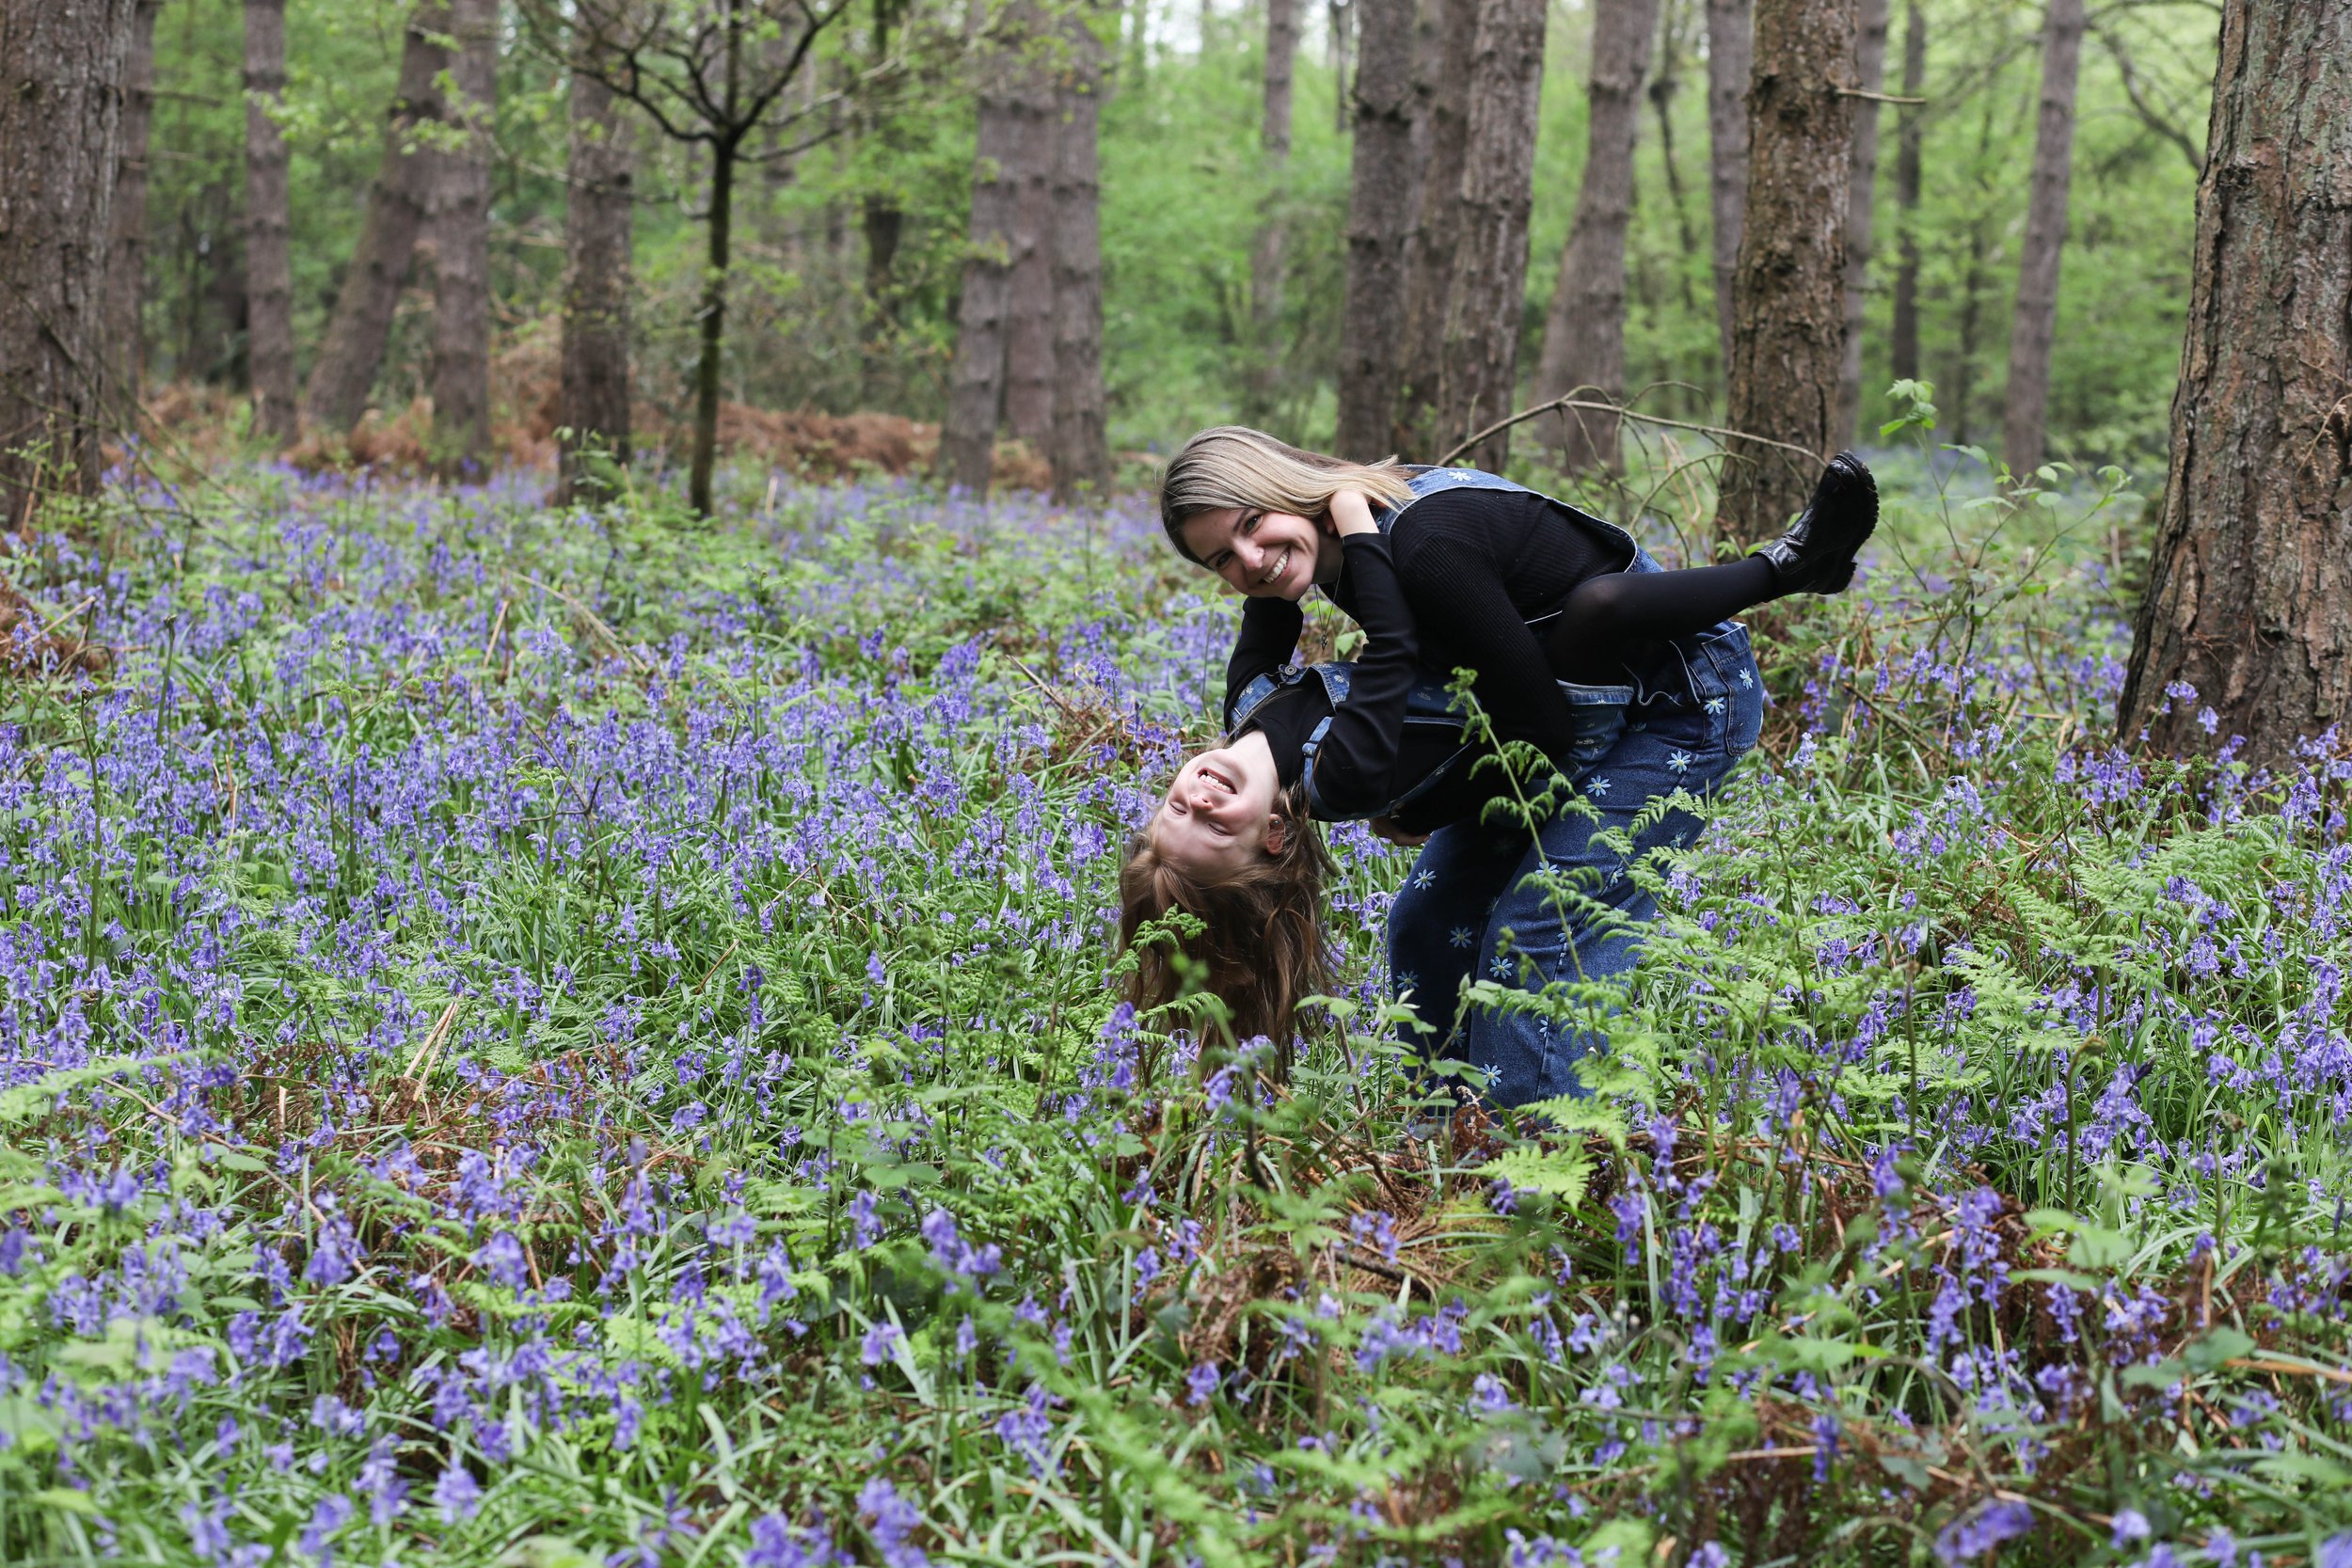 MUM AND DAUGHTER PHOTO SHOOT IN THE BLUEBELLS | BERKSHIRE PORTRAIT SHOOTS37 choice .JPG